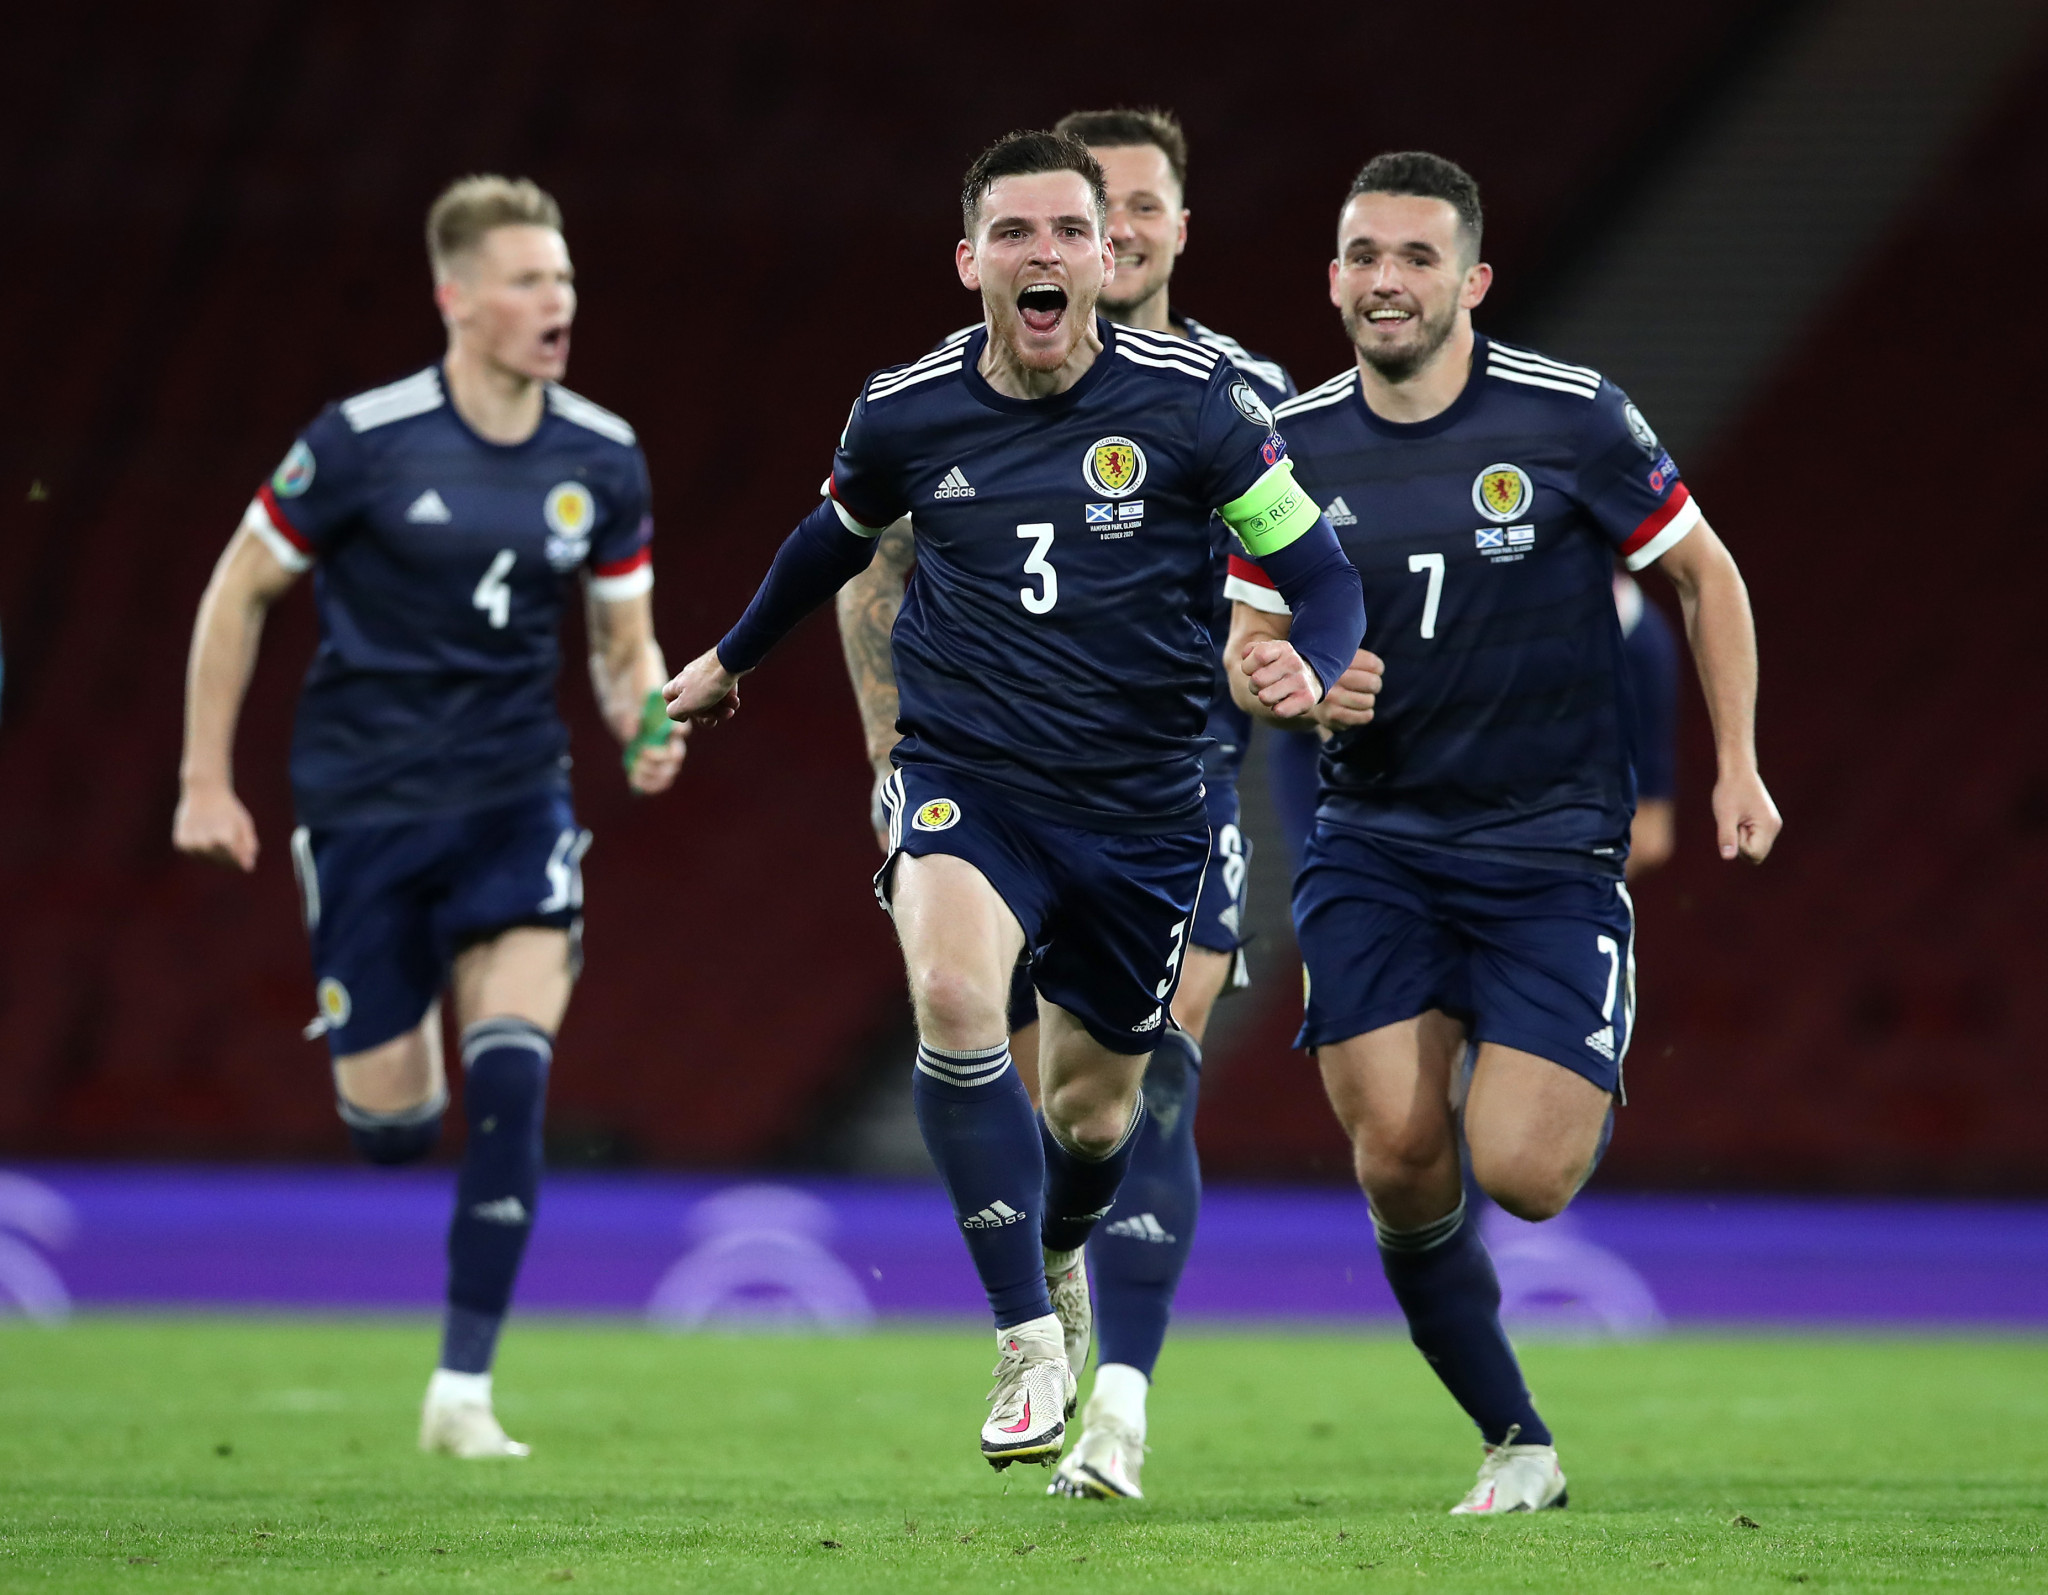 Scotland are set to play Ukraine in the playoff semi-finals ©Getty Images